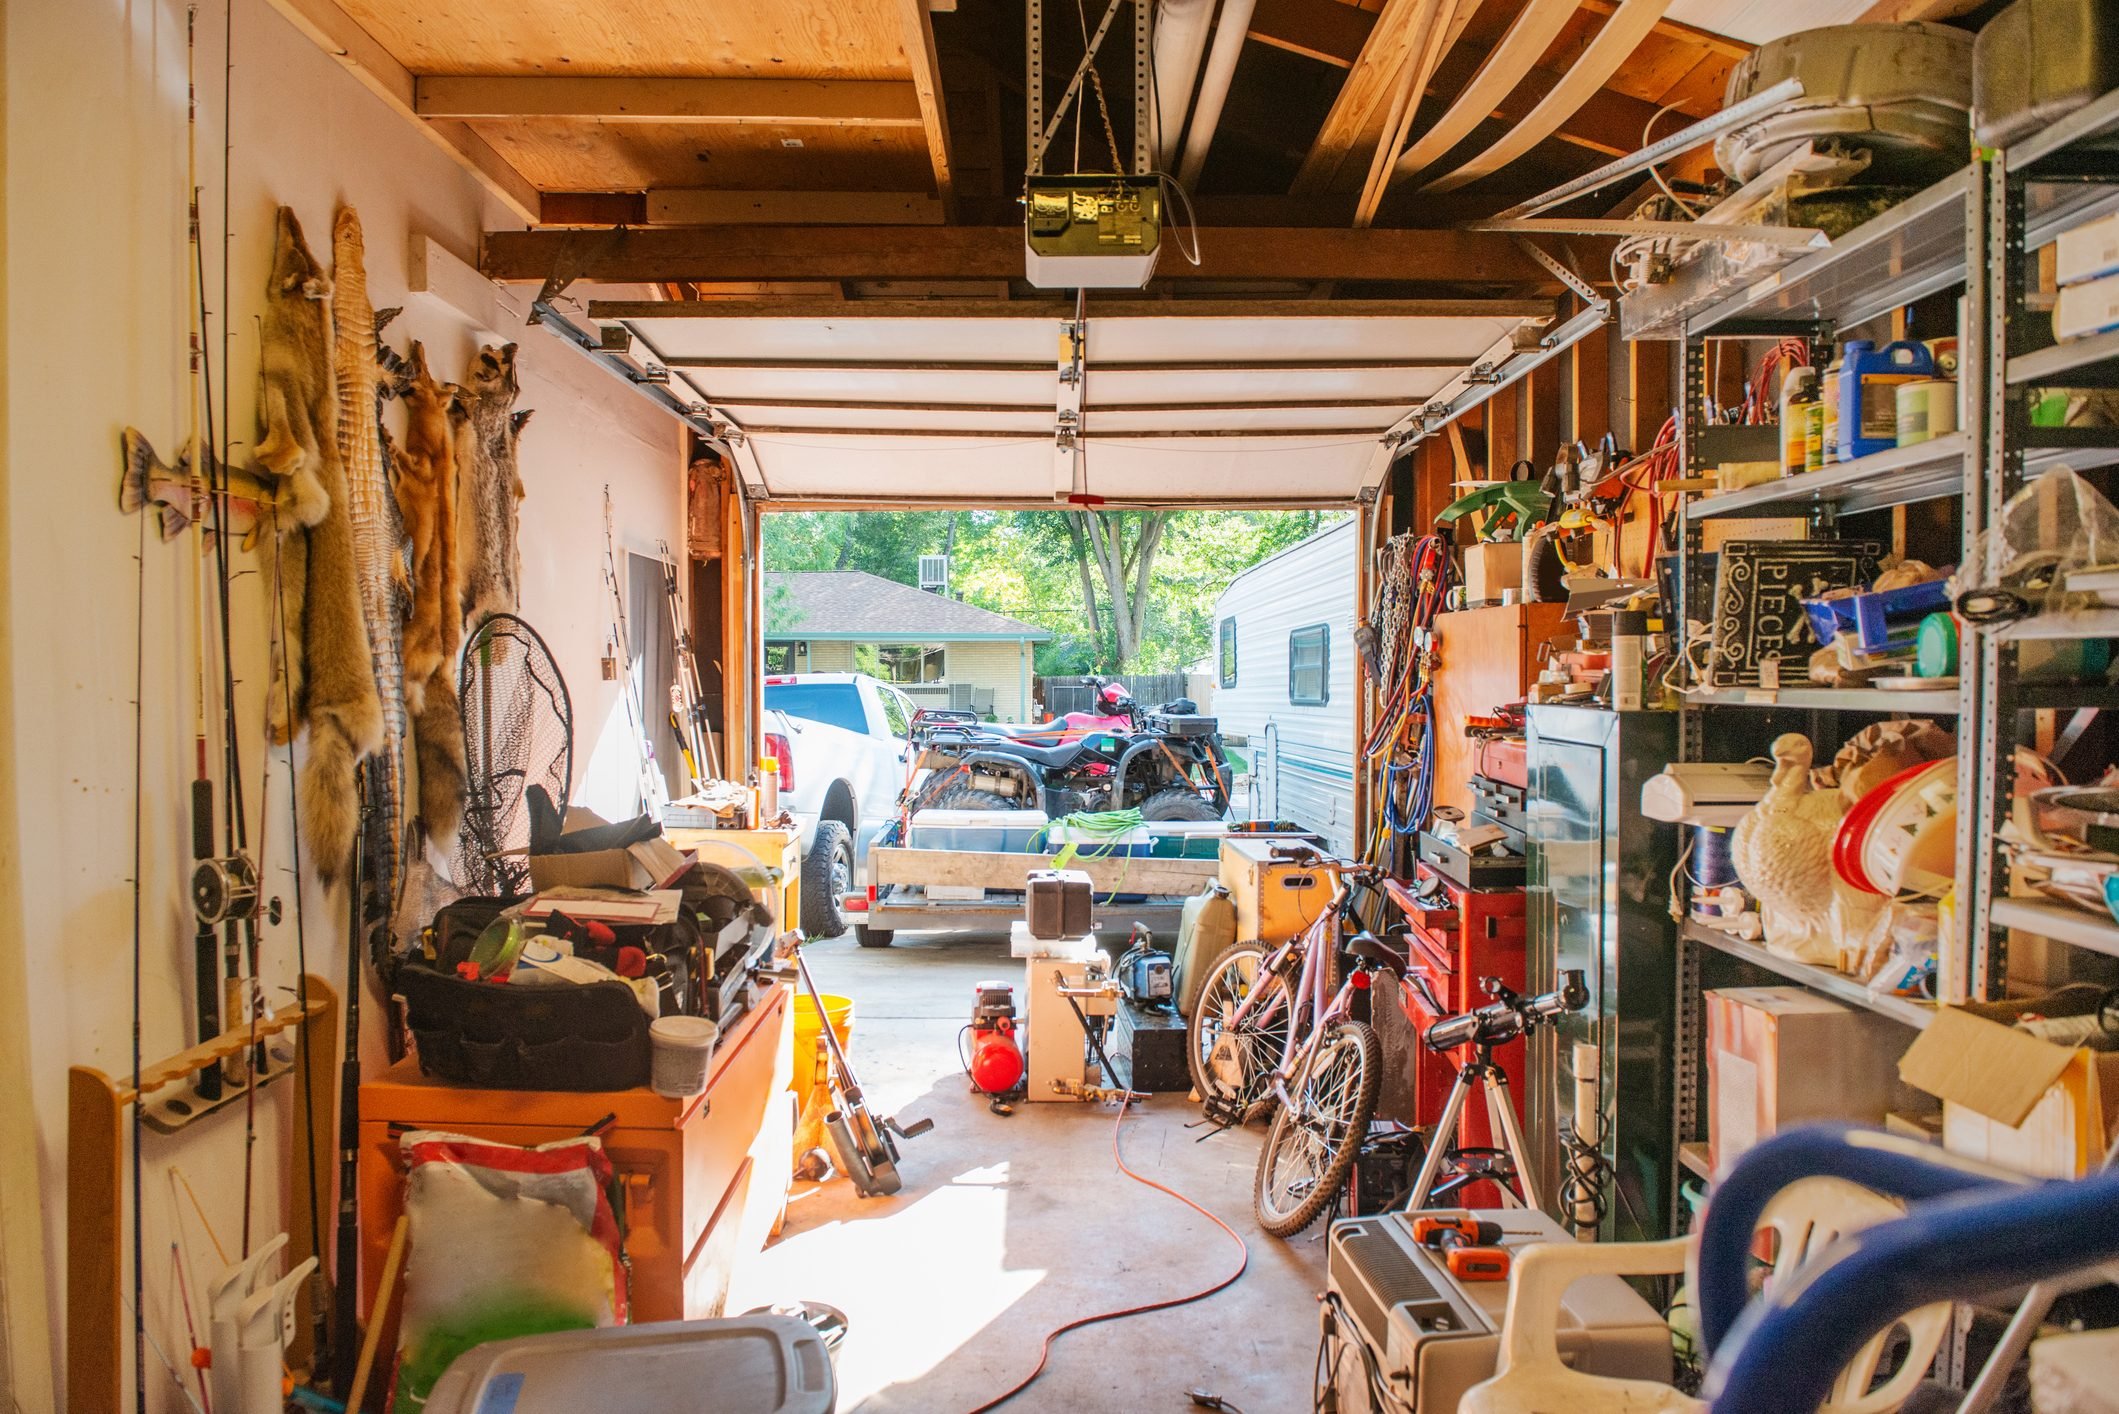 Cluttered American Garage Full of Things in Denver Colorado